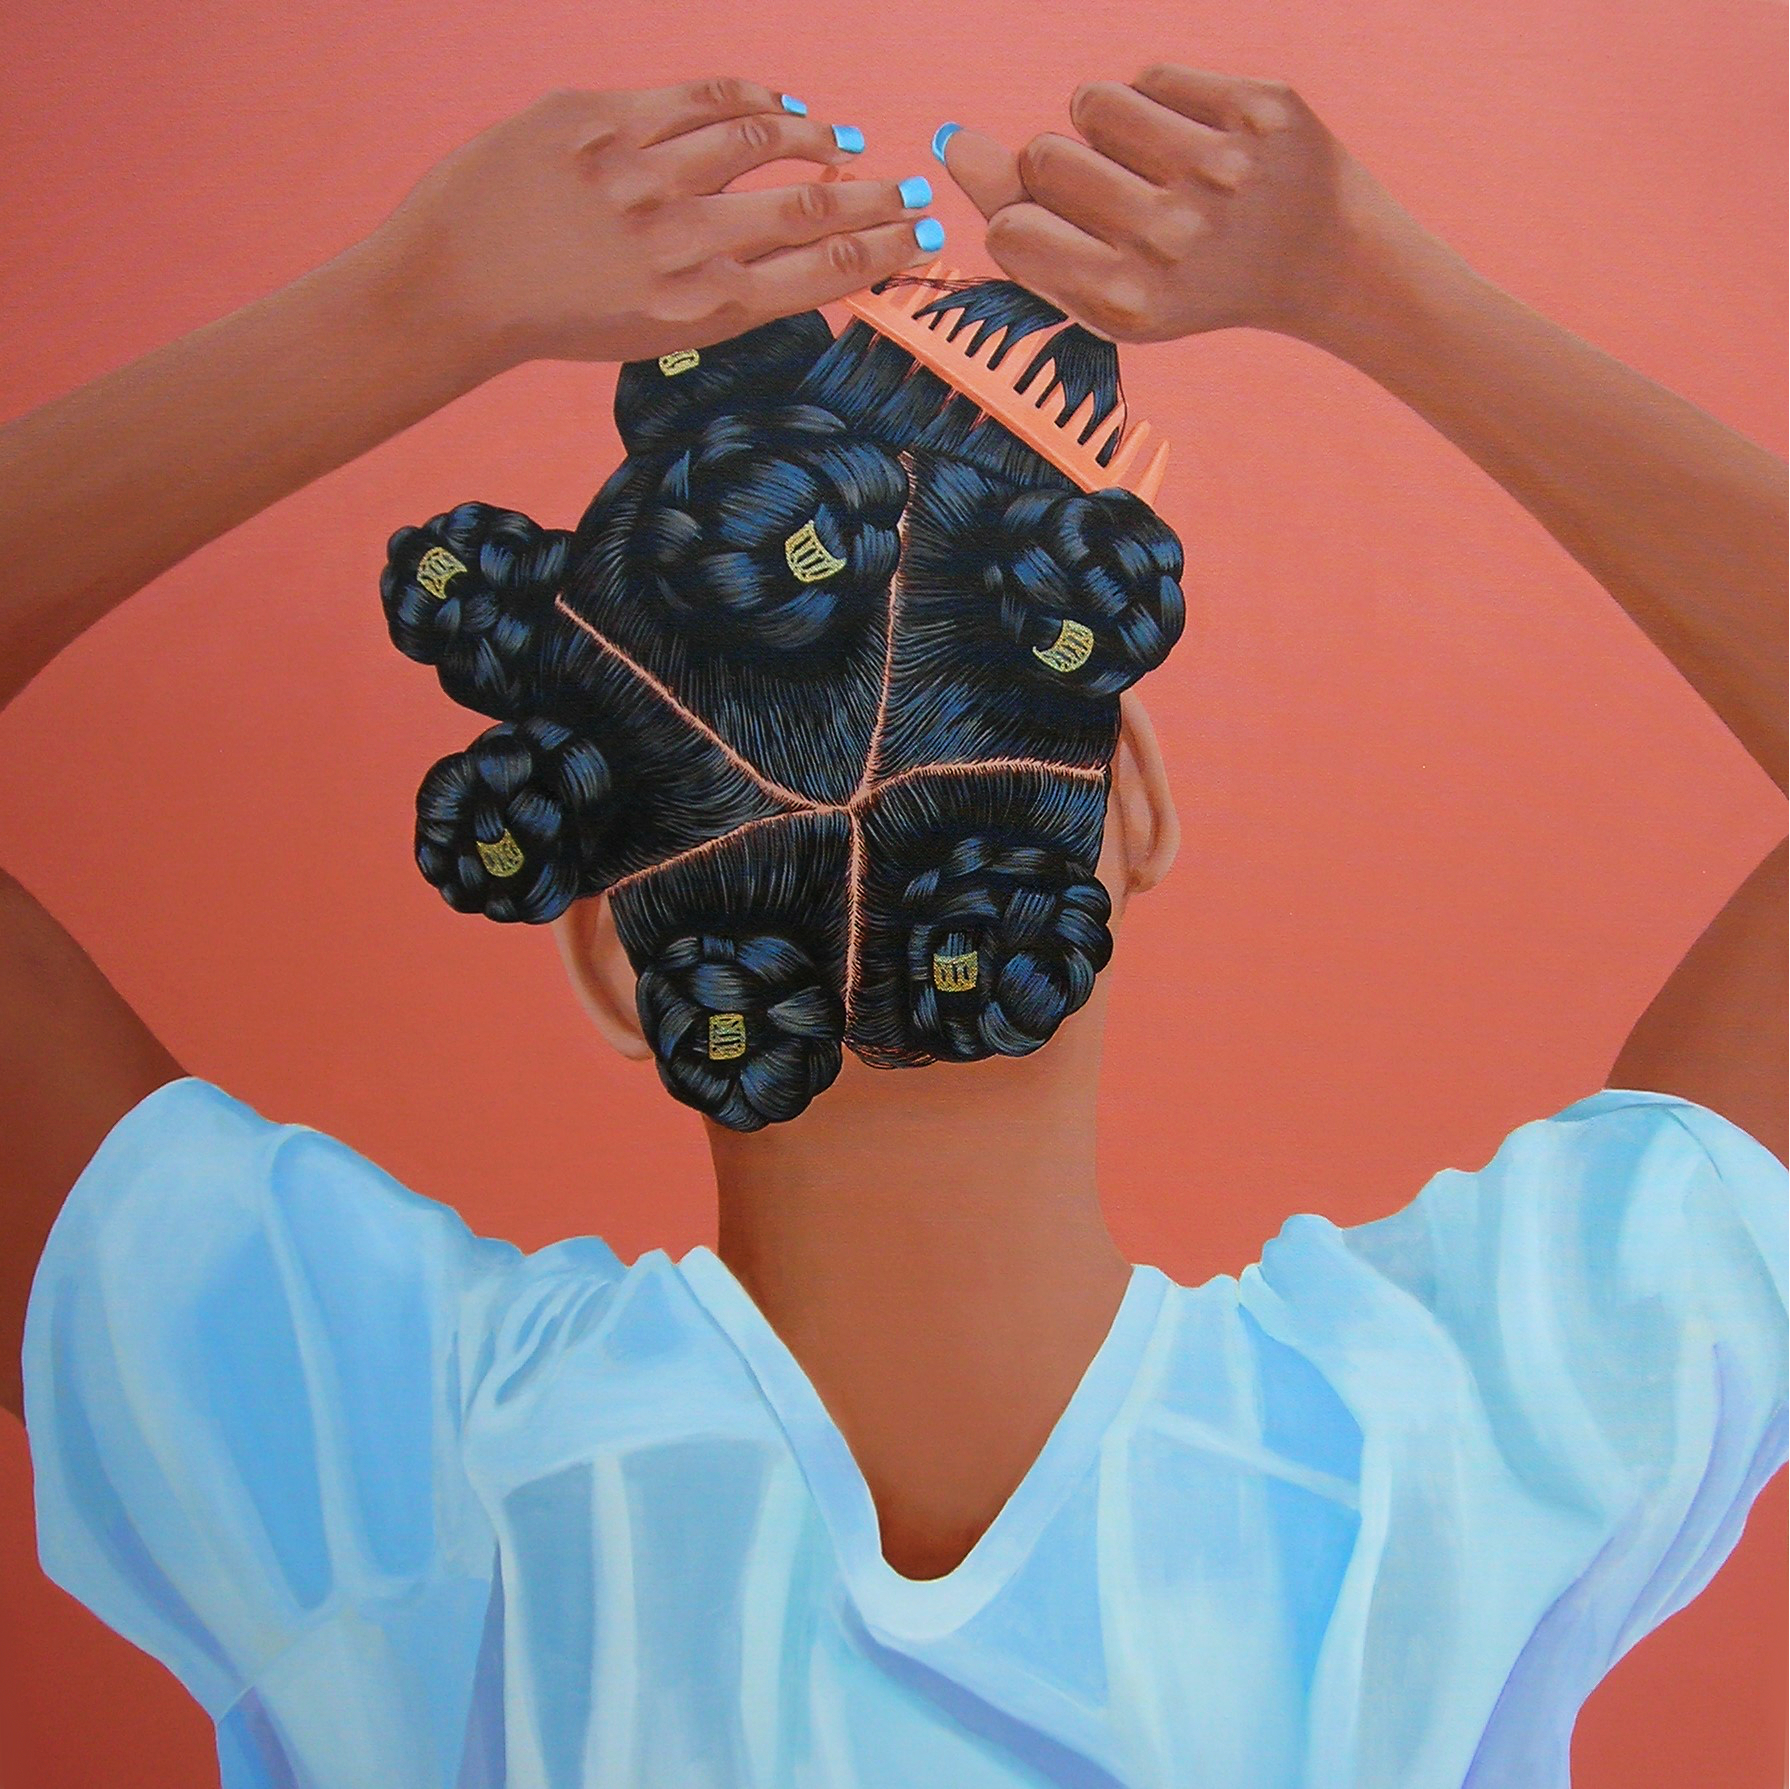 Black Contemporary Art presents works by and about people of African descent, such as "Sore Arms," a painting by Jessica Spence